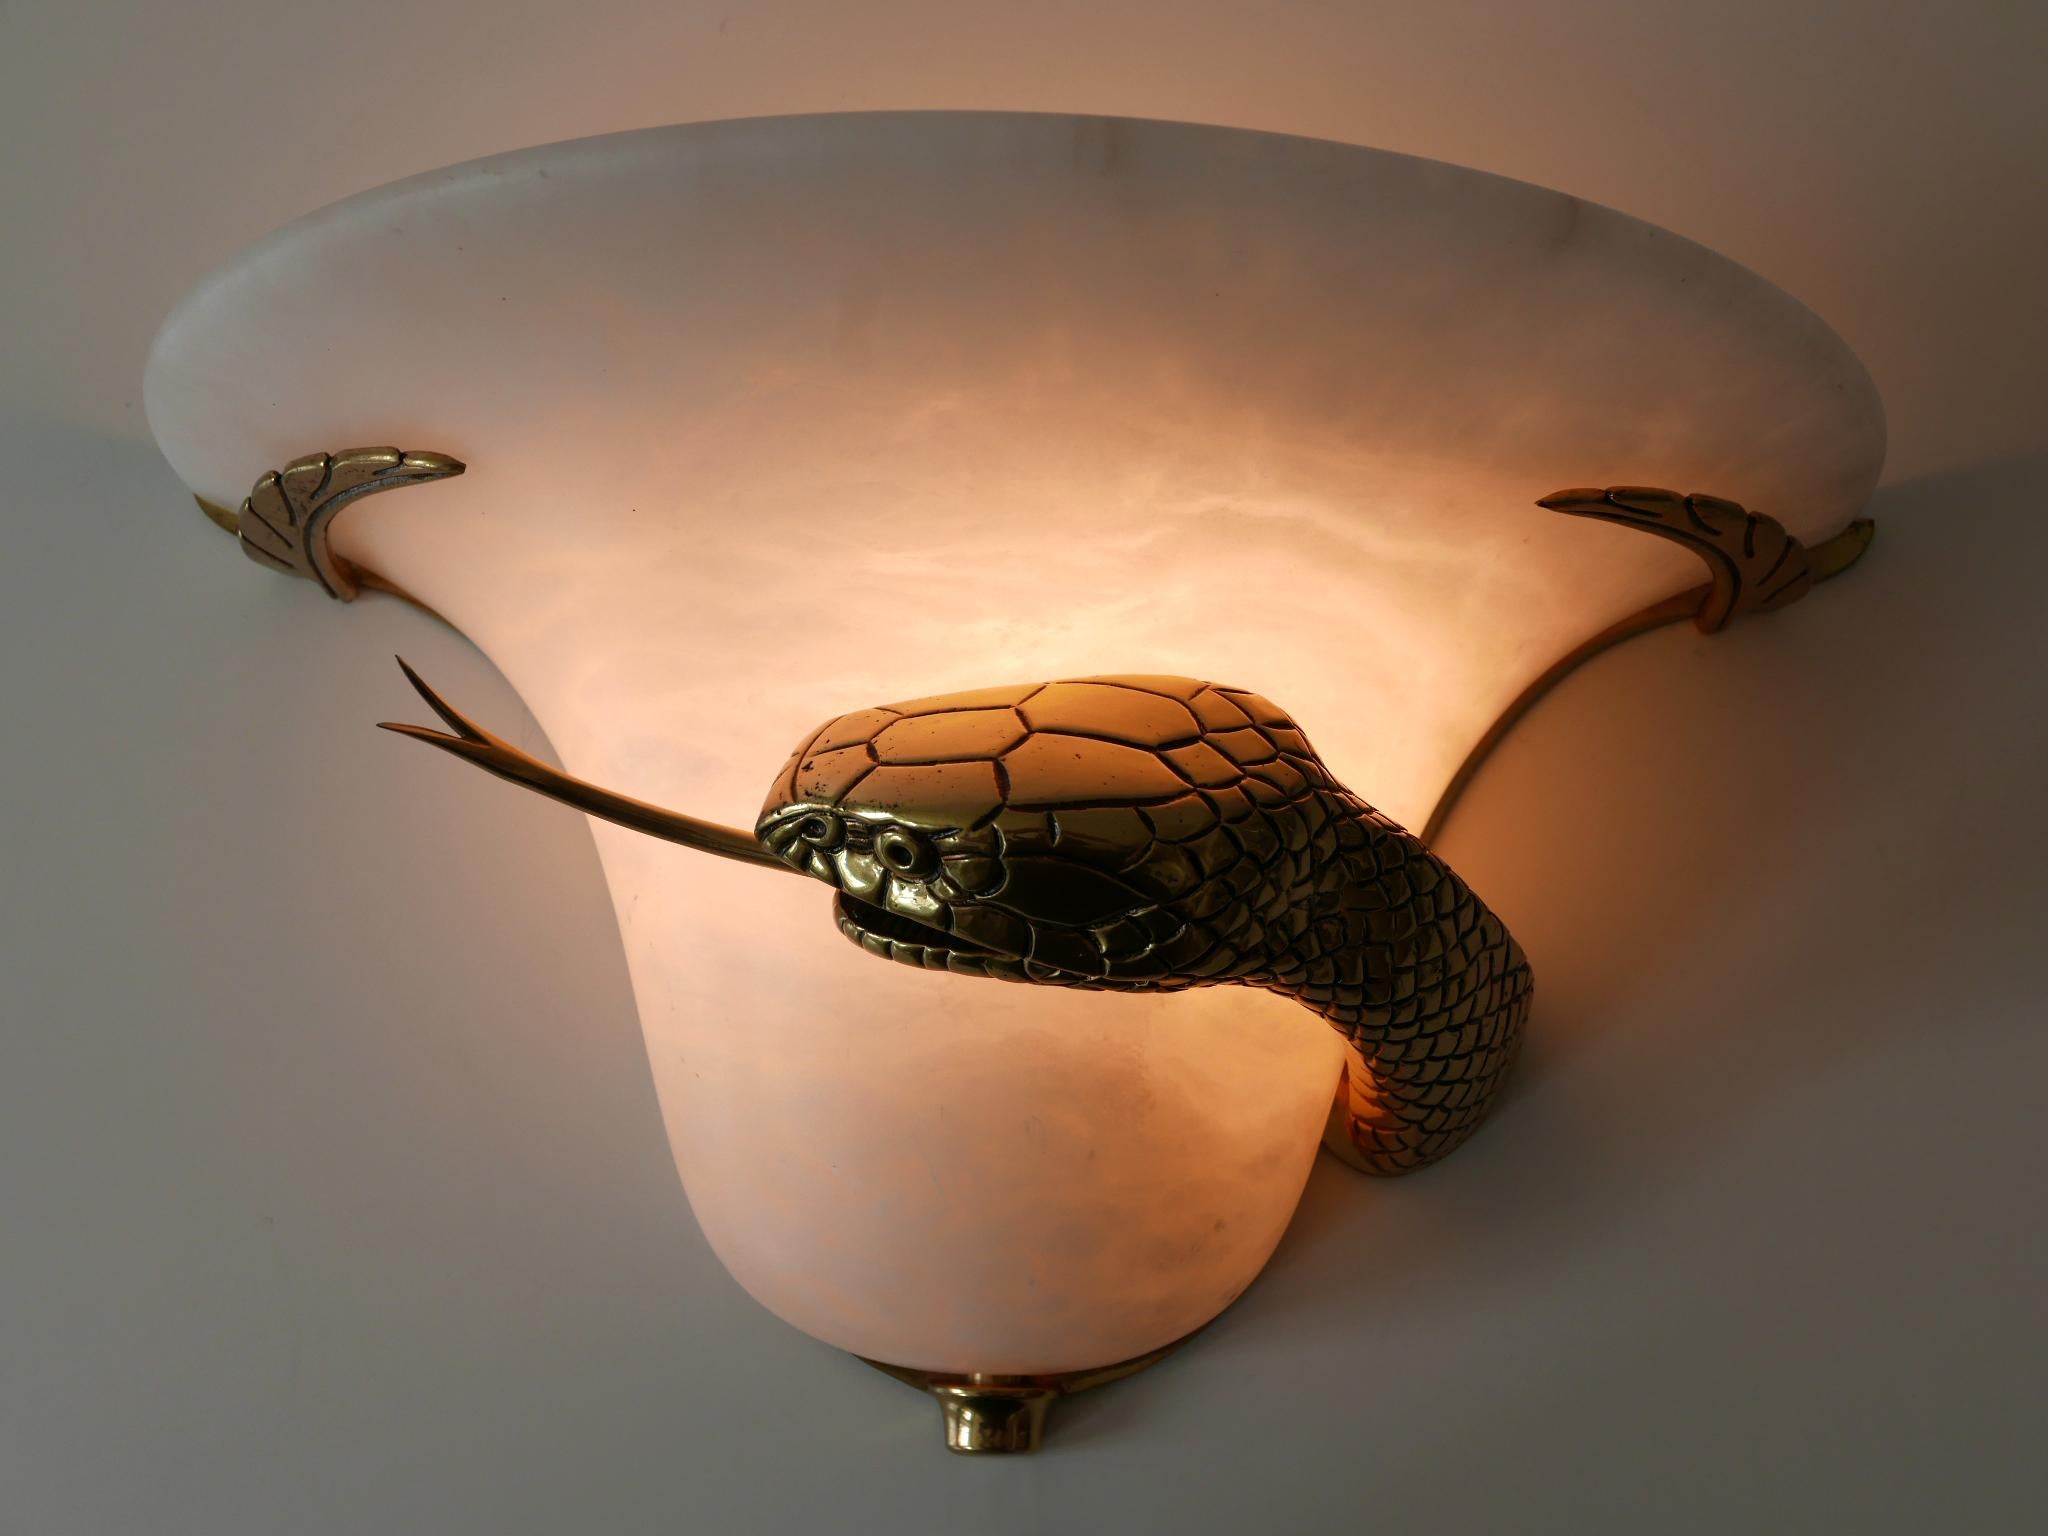 Extremely rare Mid-Century Modern cast brass and alabaster snake sconce or wall lamp. Designed and manufactured probably in Italy, 1970s.

Executed in cast brass and marble (alabaster), the lamp needs 1 E27 / E26 Edison screw fit bulb, is